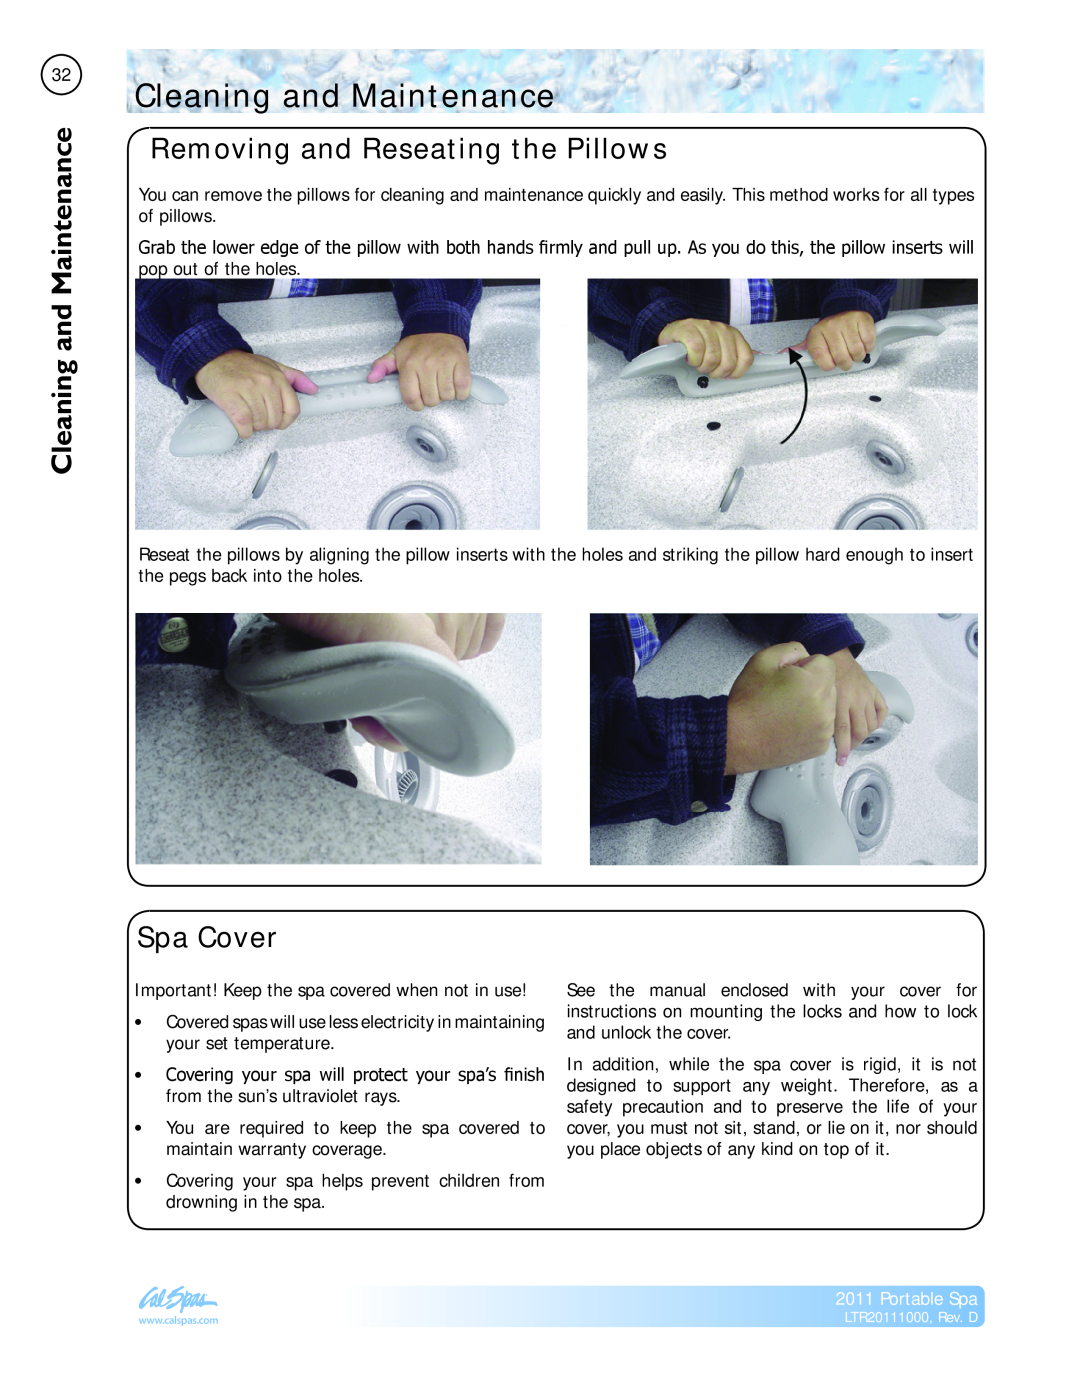 Cal Spas LTR20111000 manual Cleaning and Maintenance, Removing and Reseating the Pillows, Spa Cover, Portable Spa 